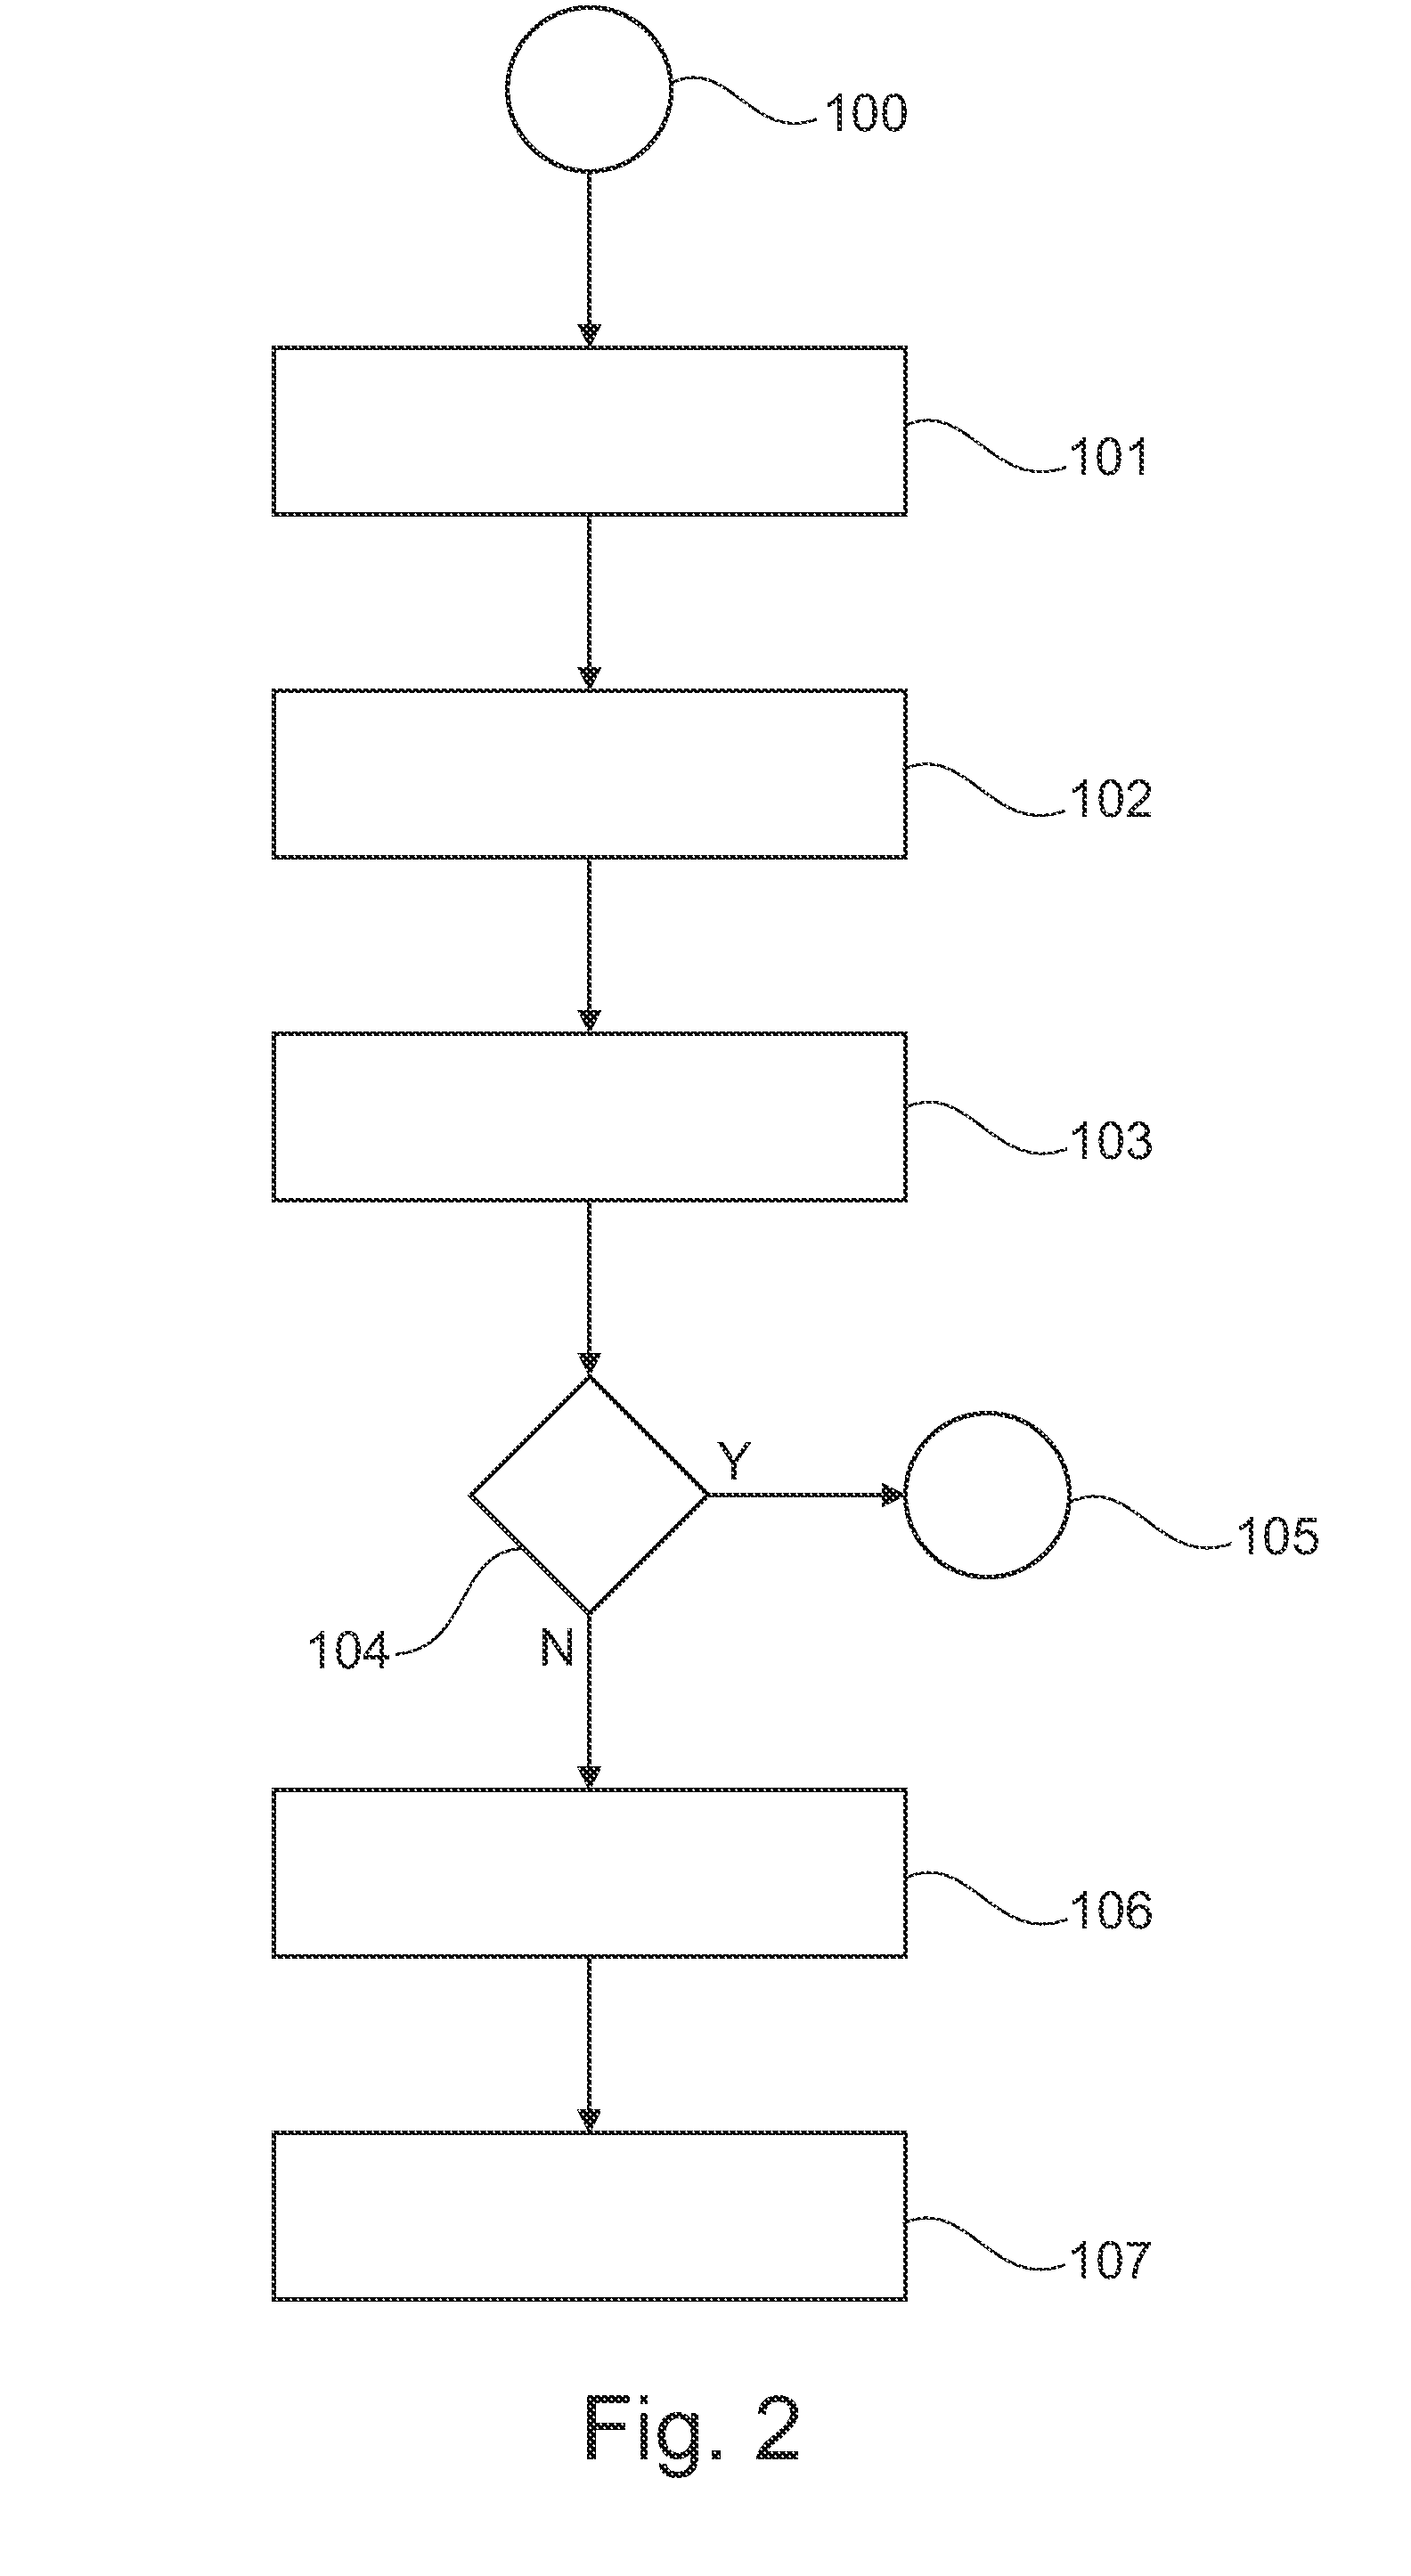 Method and Apparatus for Controlling a Parking Process of a Vehicle